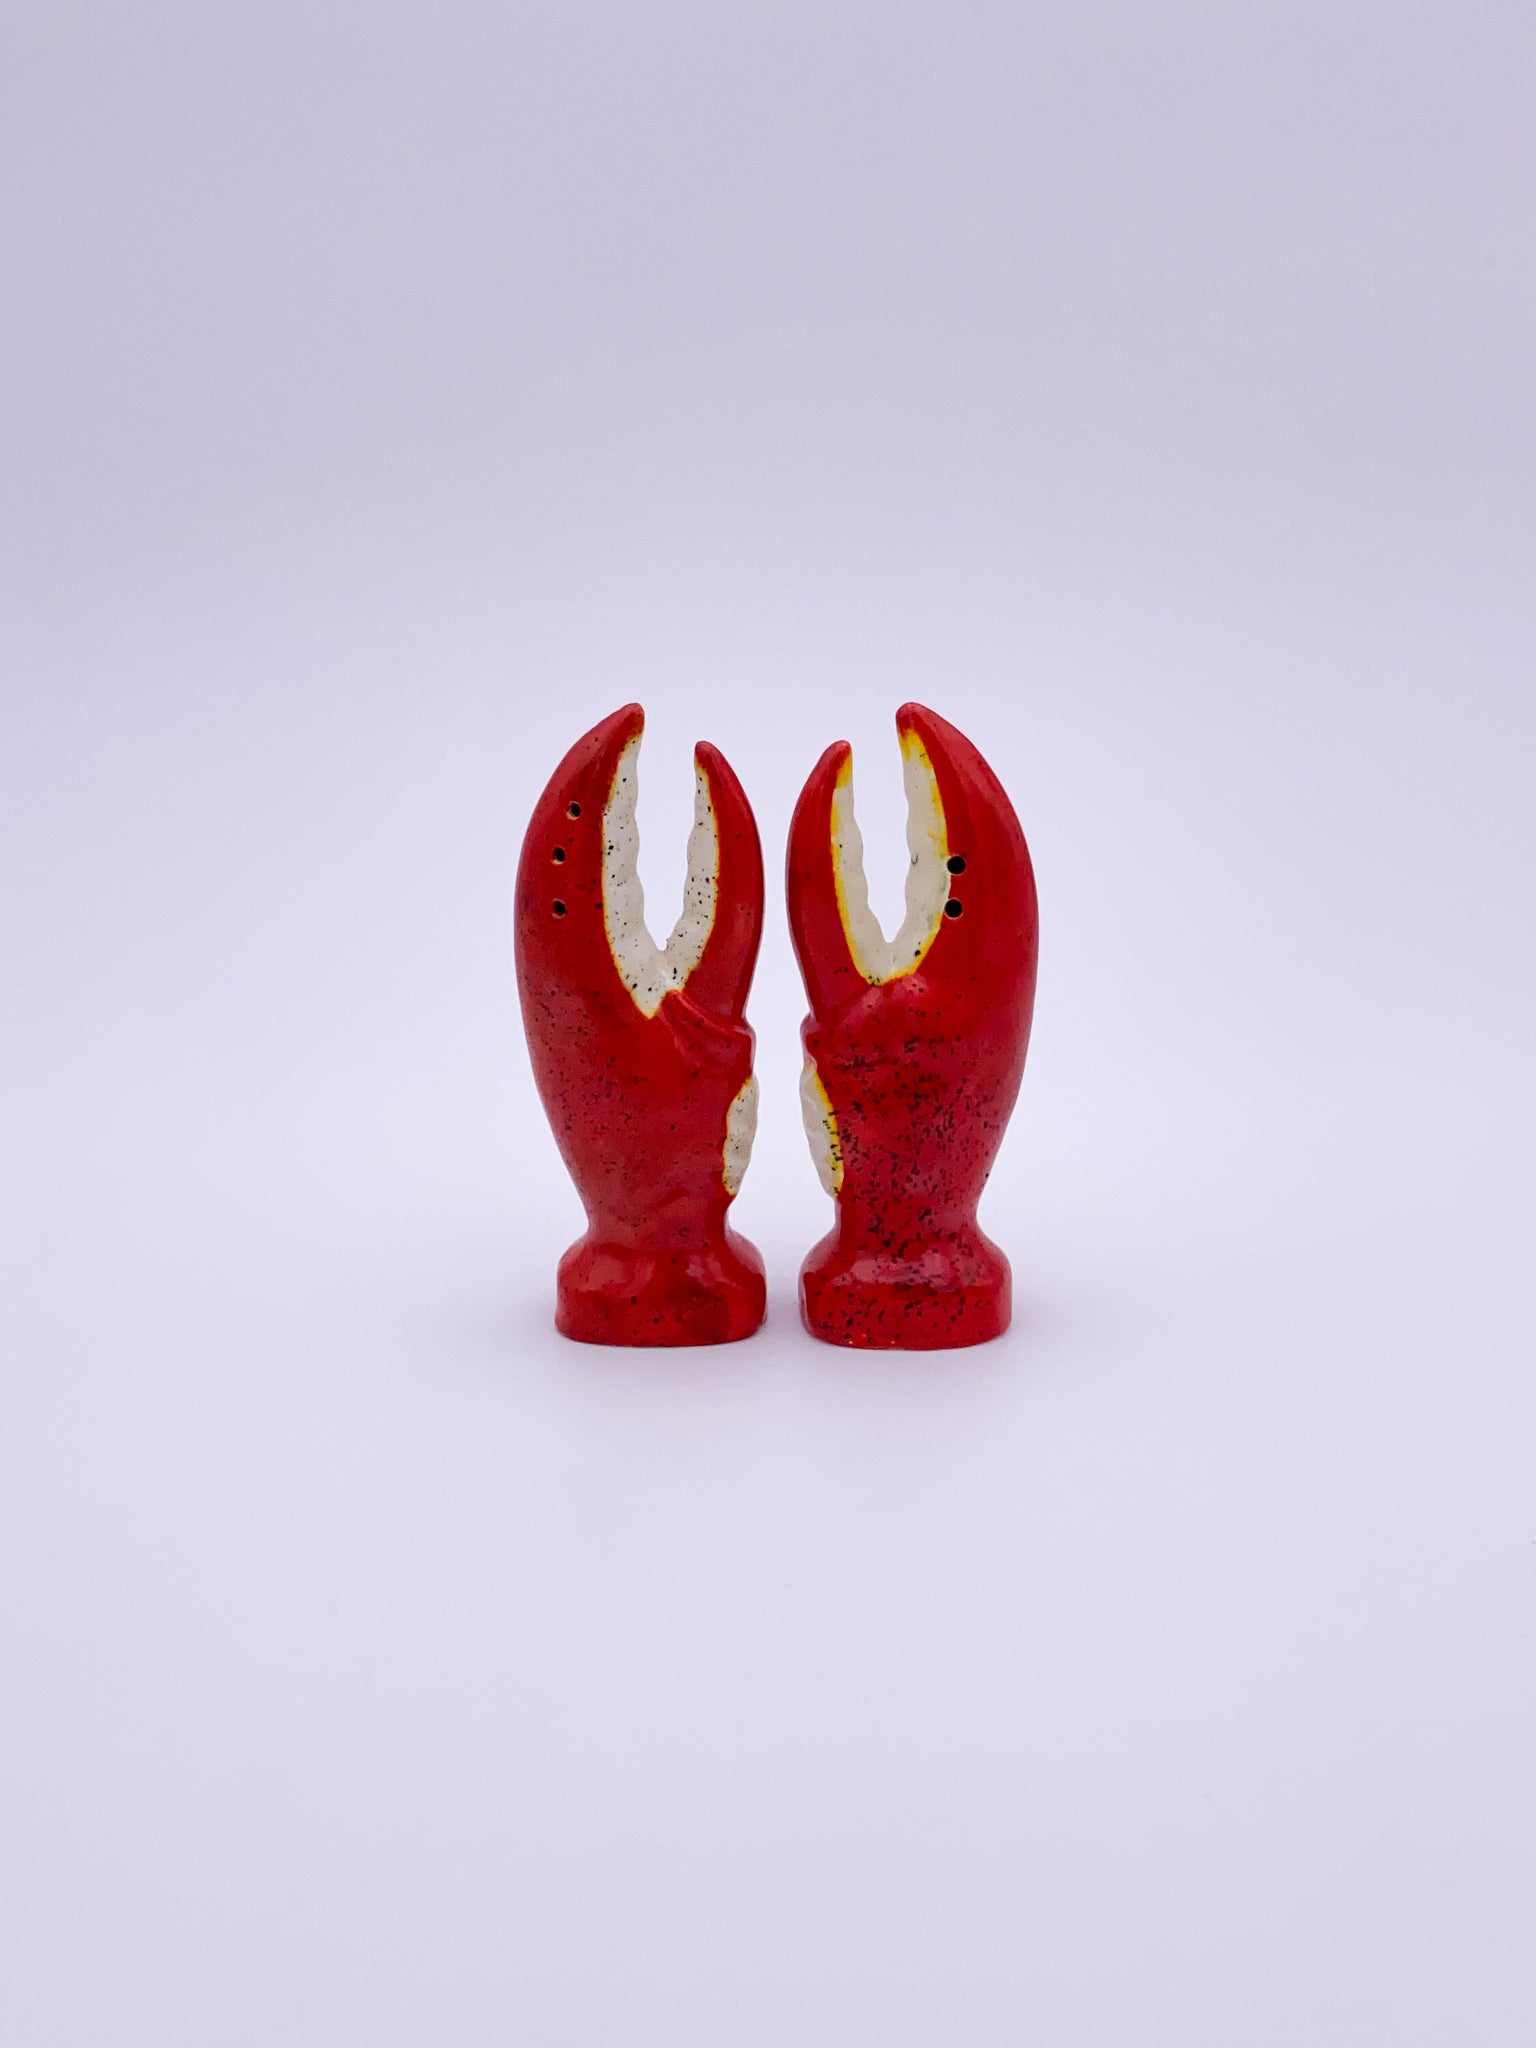 Lobster Claws Salt & Pepper Shakers